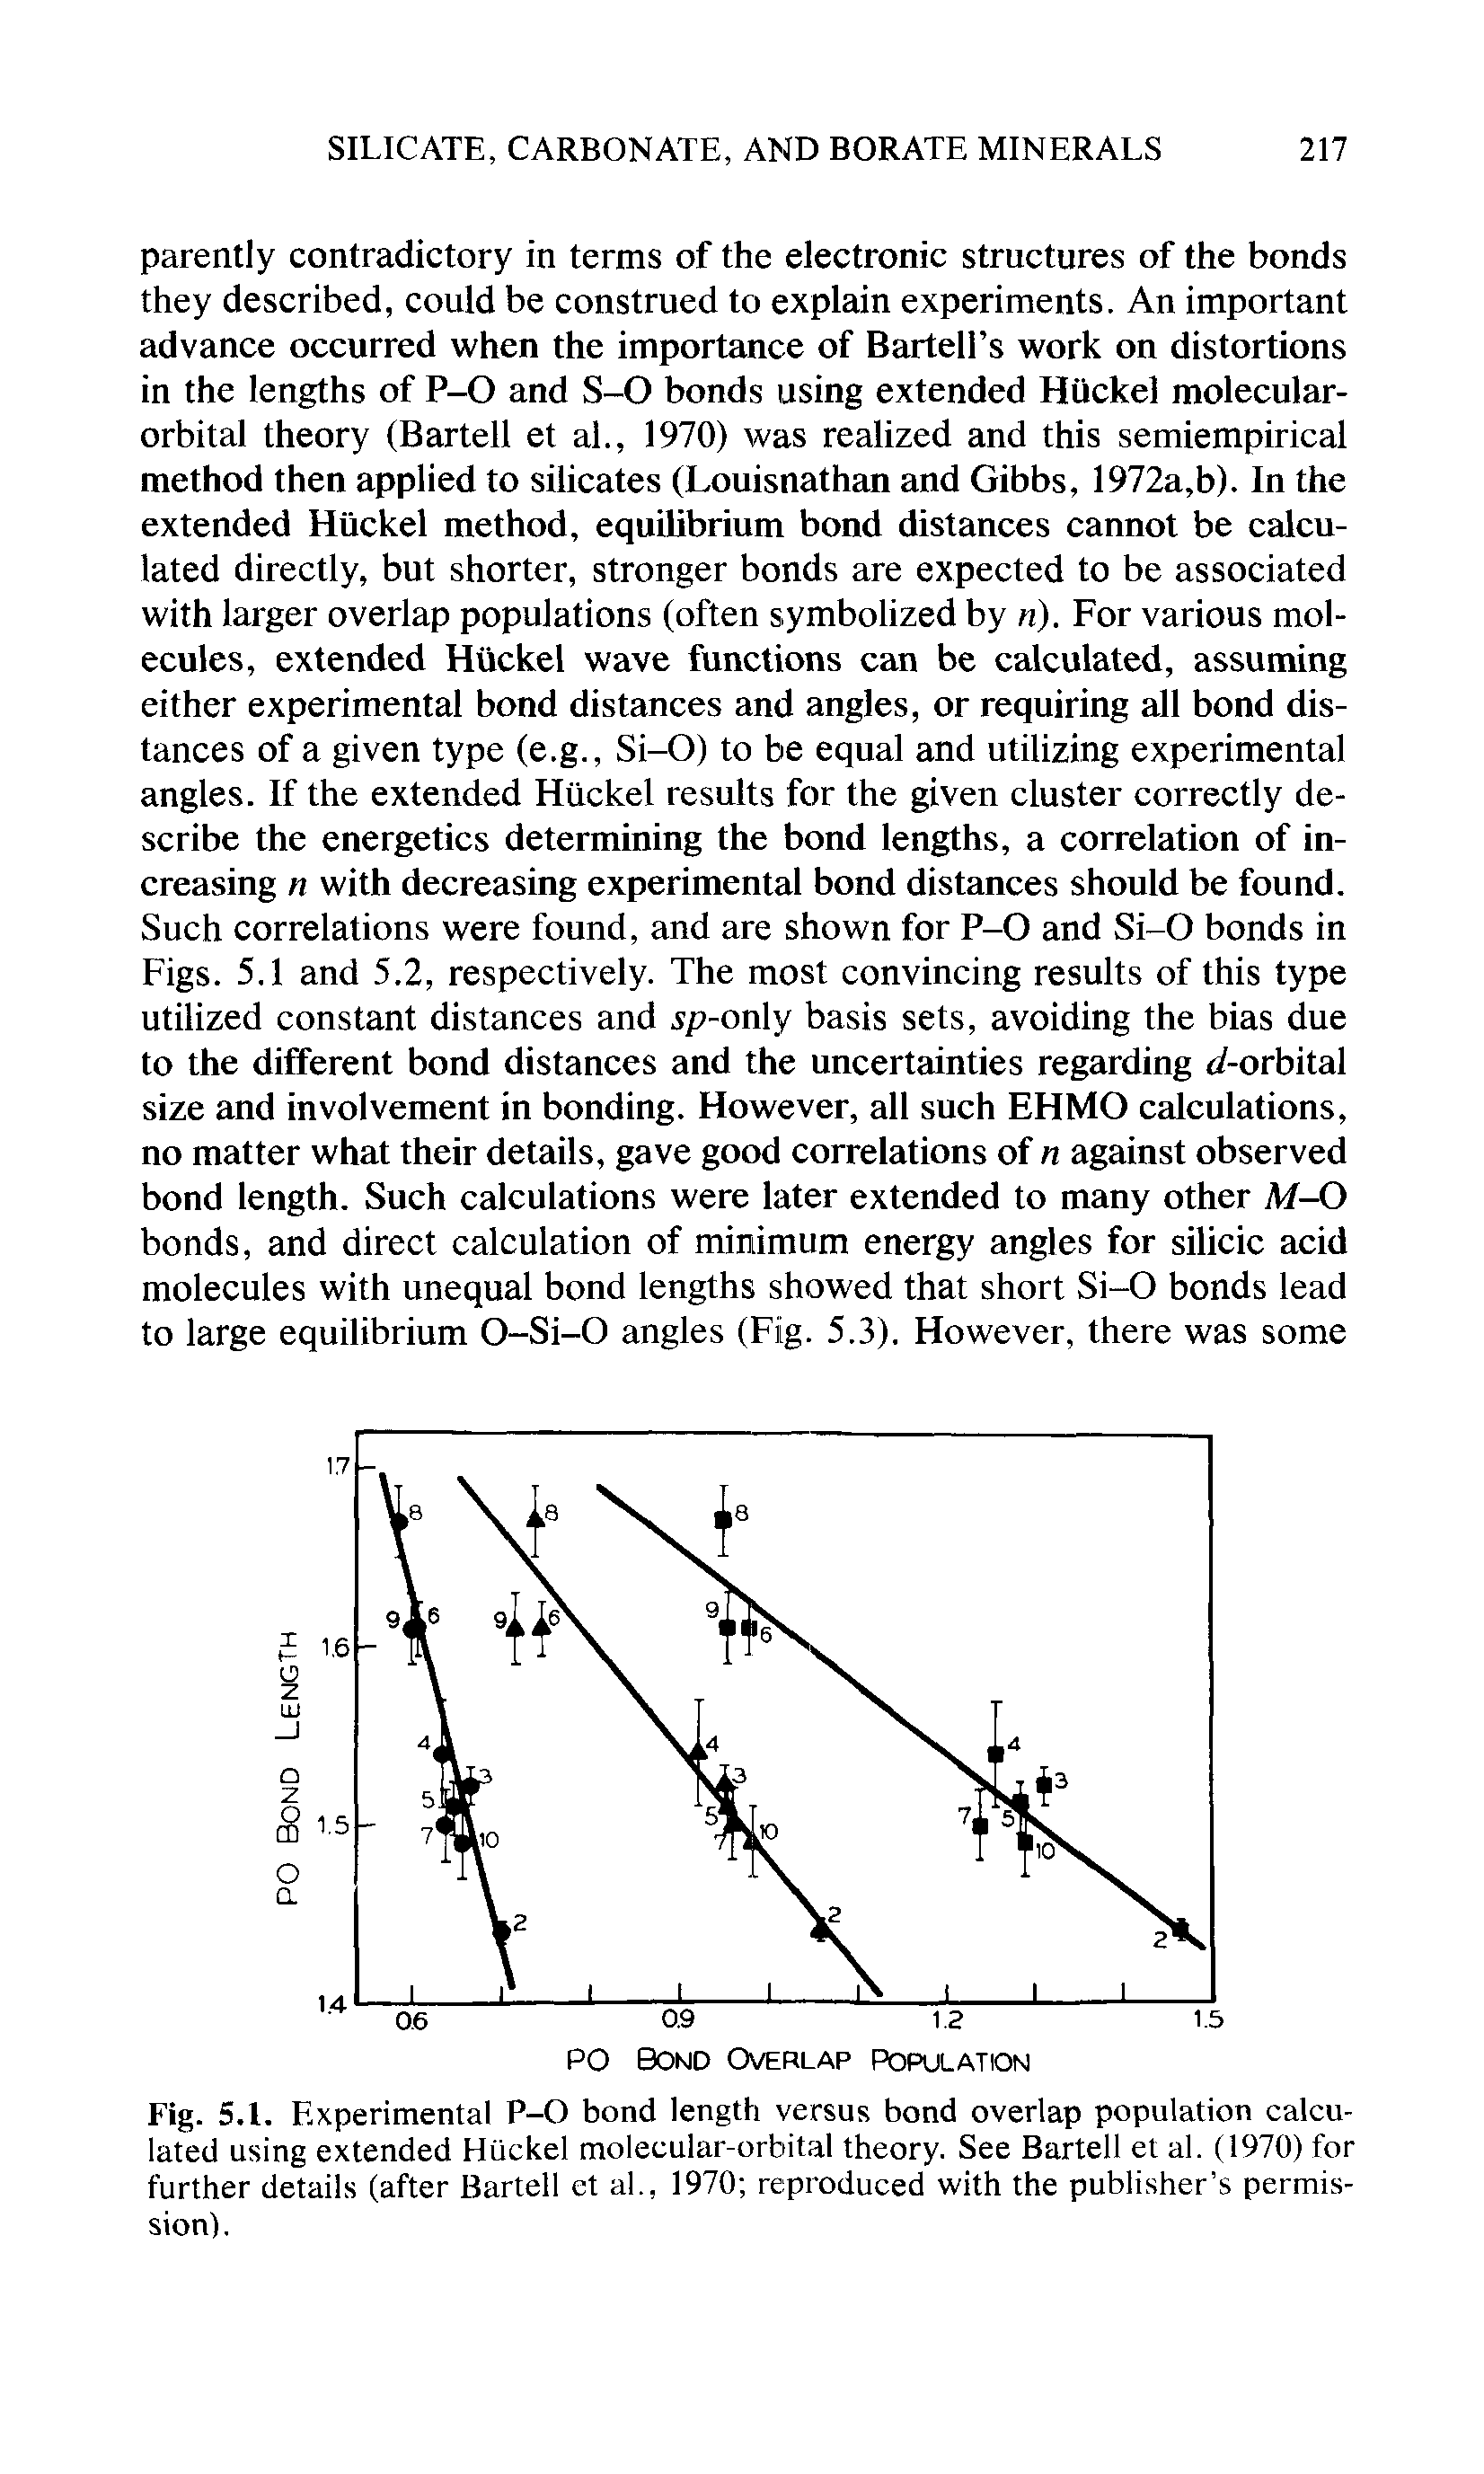 Fig. 5.1. Experimental P-O bond length versus bond overlap population calculated using extended Huckel molecular-orbital theory. See Bartell et al. (1970) for further details (after Bartell et al., 1970 reproduced with the publisher s permission).